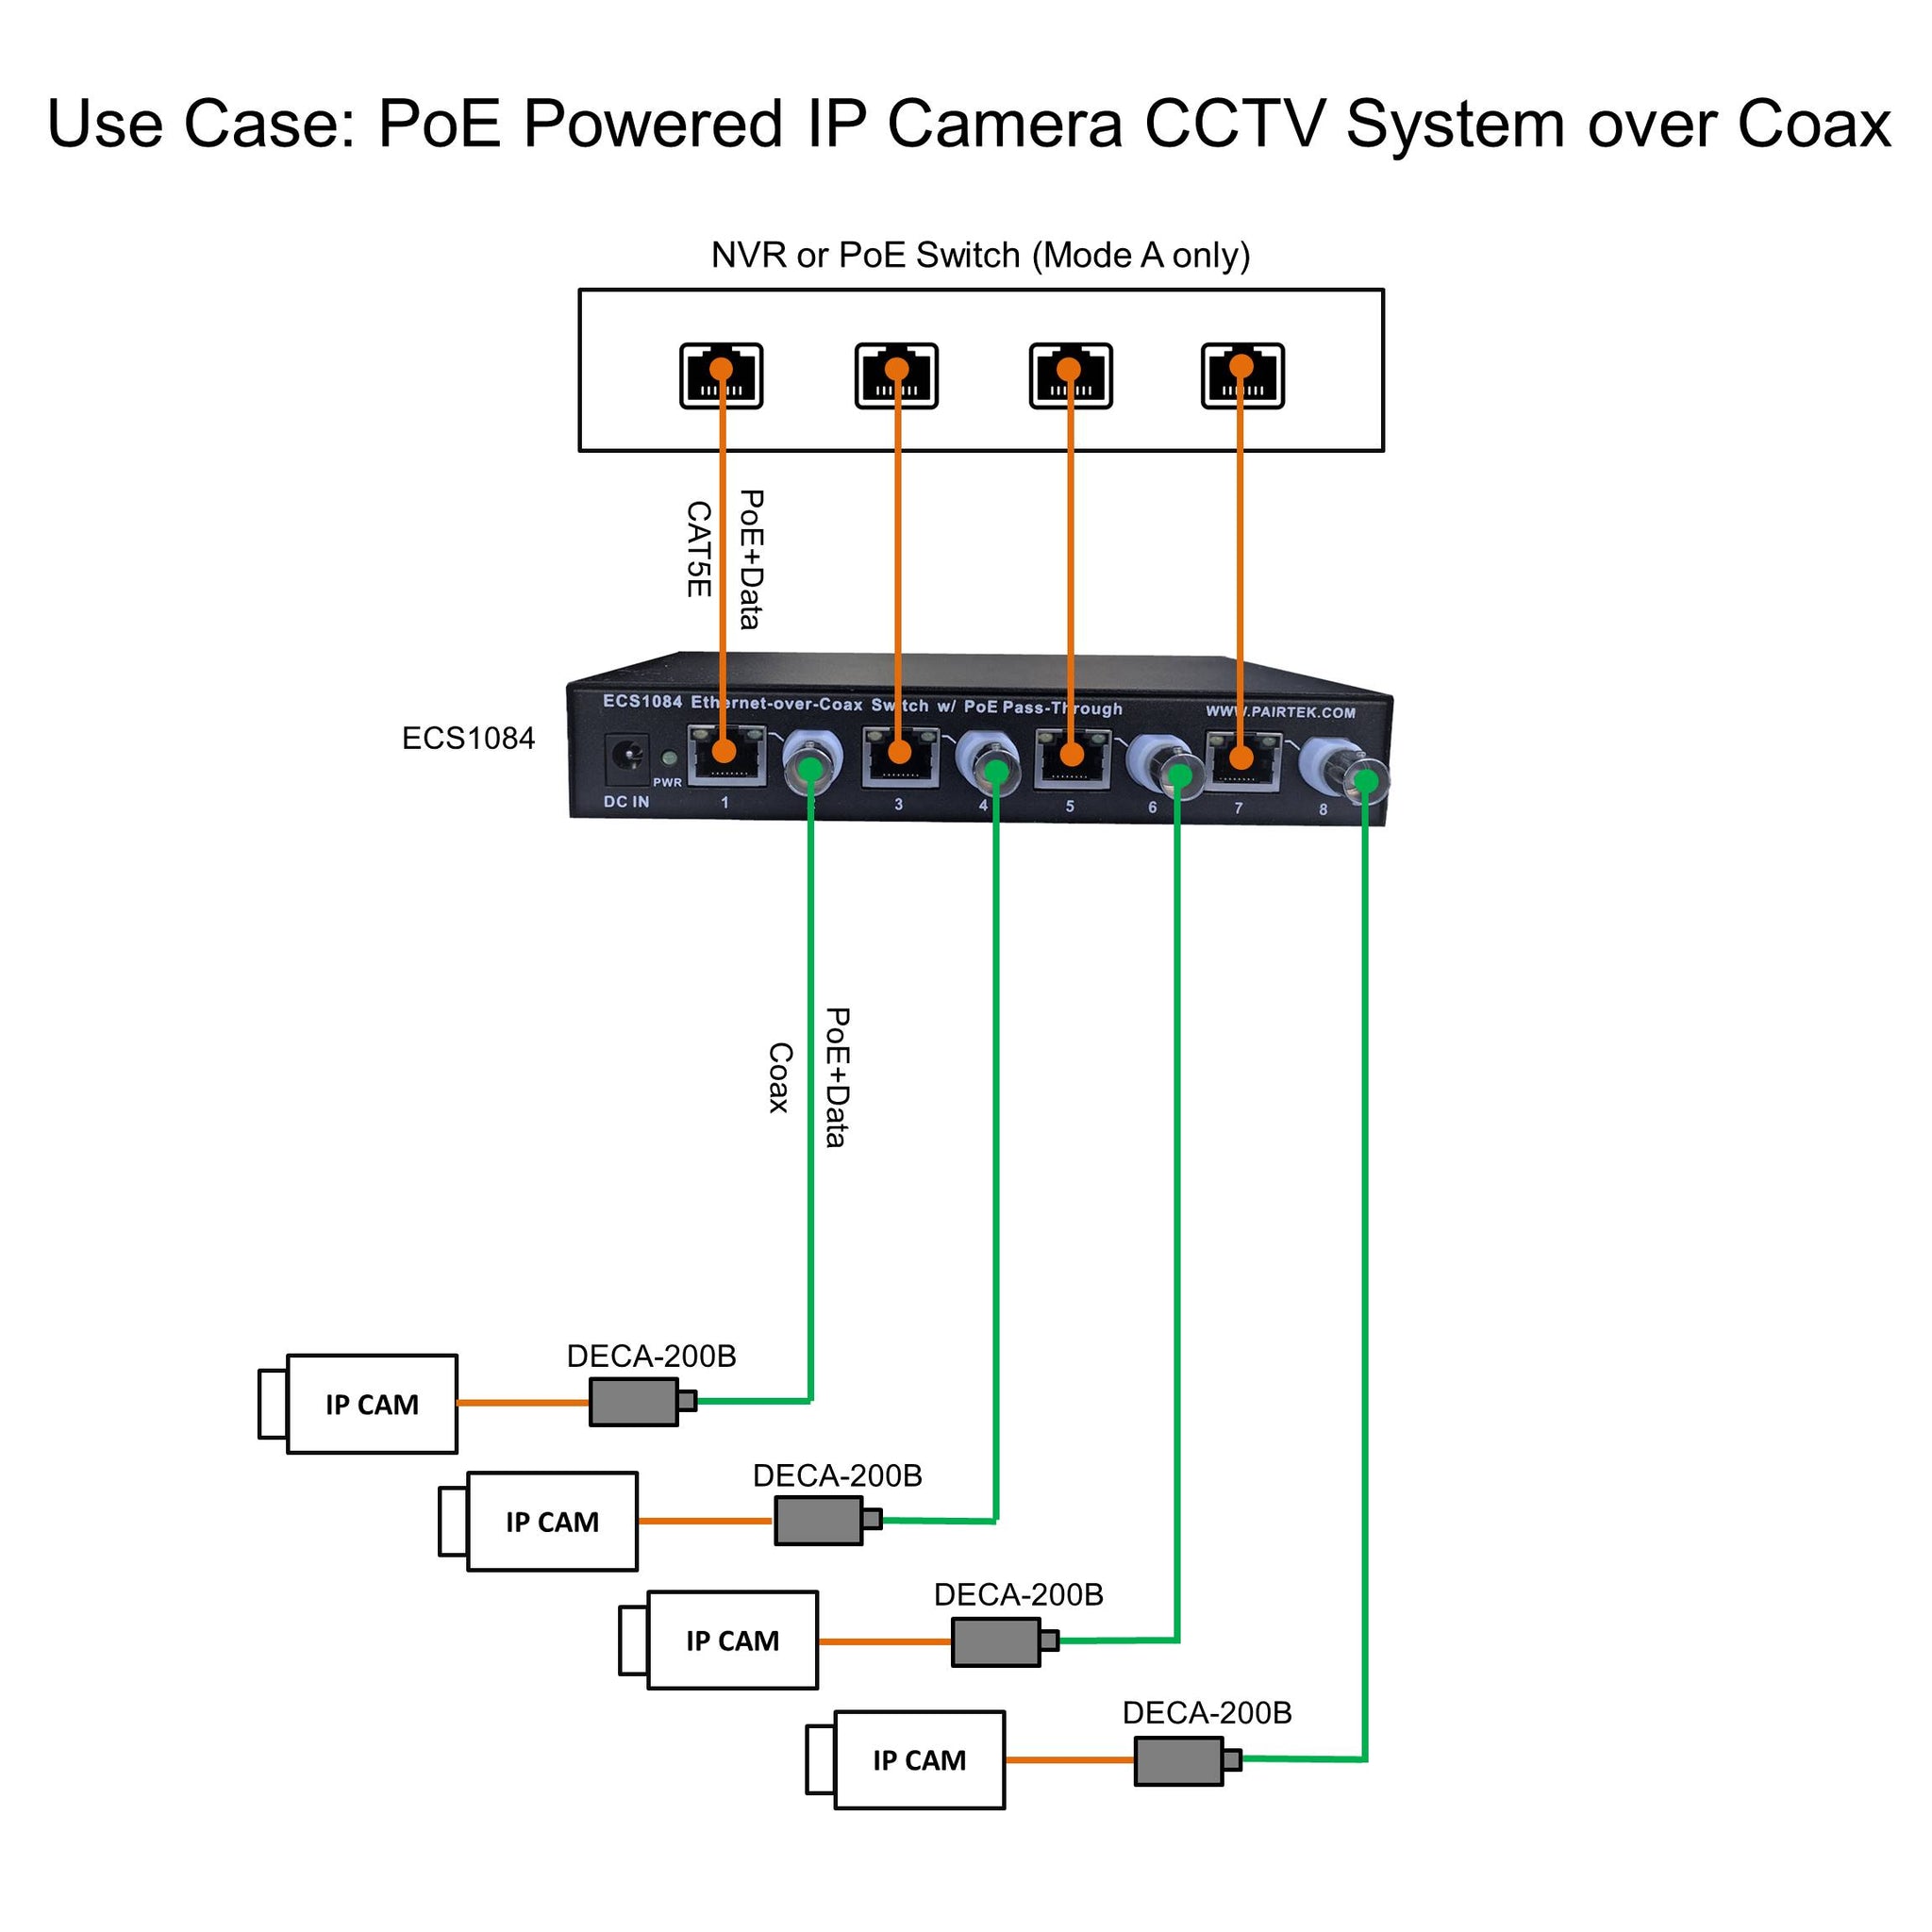 Ethernet-over-Coax Switch w/ PoE Pass-Through – Dualcomm